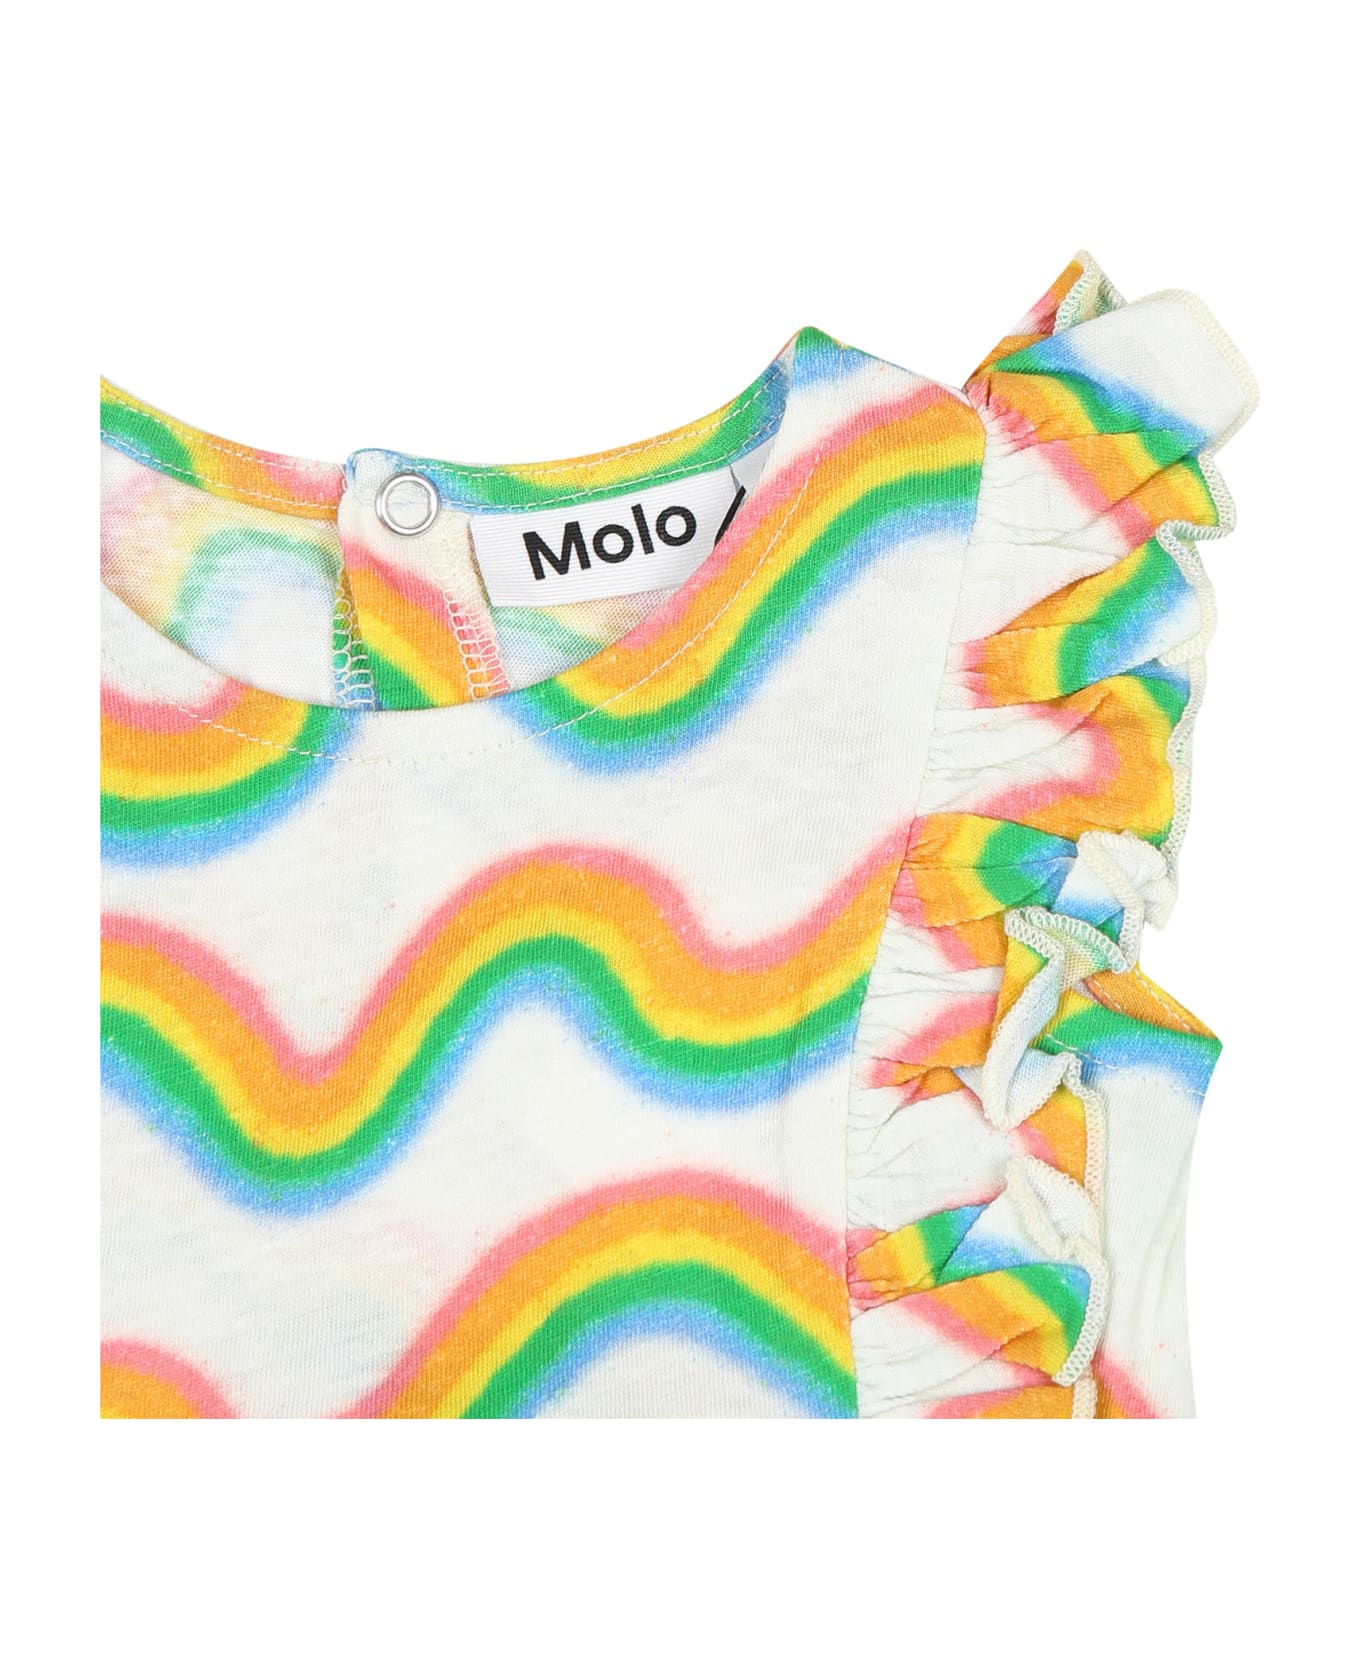 Molo White Romper For Baby Girl With Rainbow Print - Multicolor